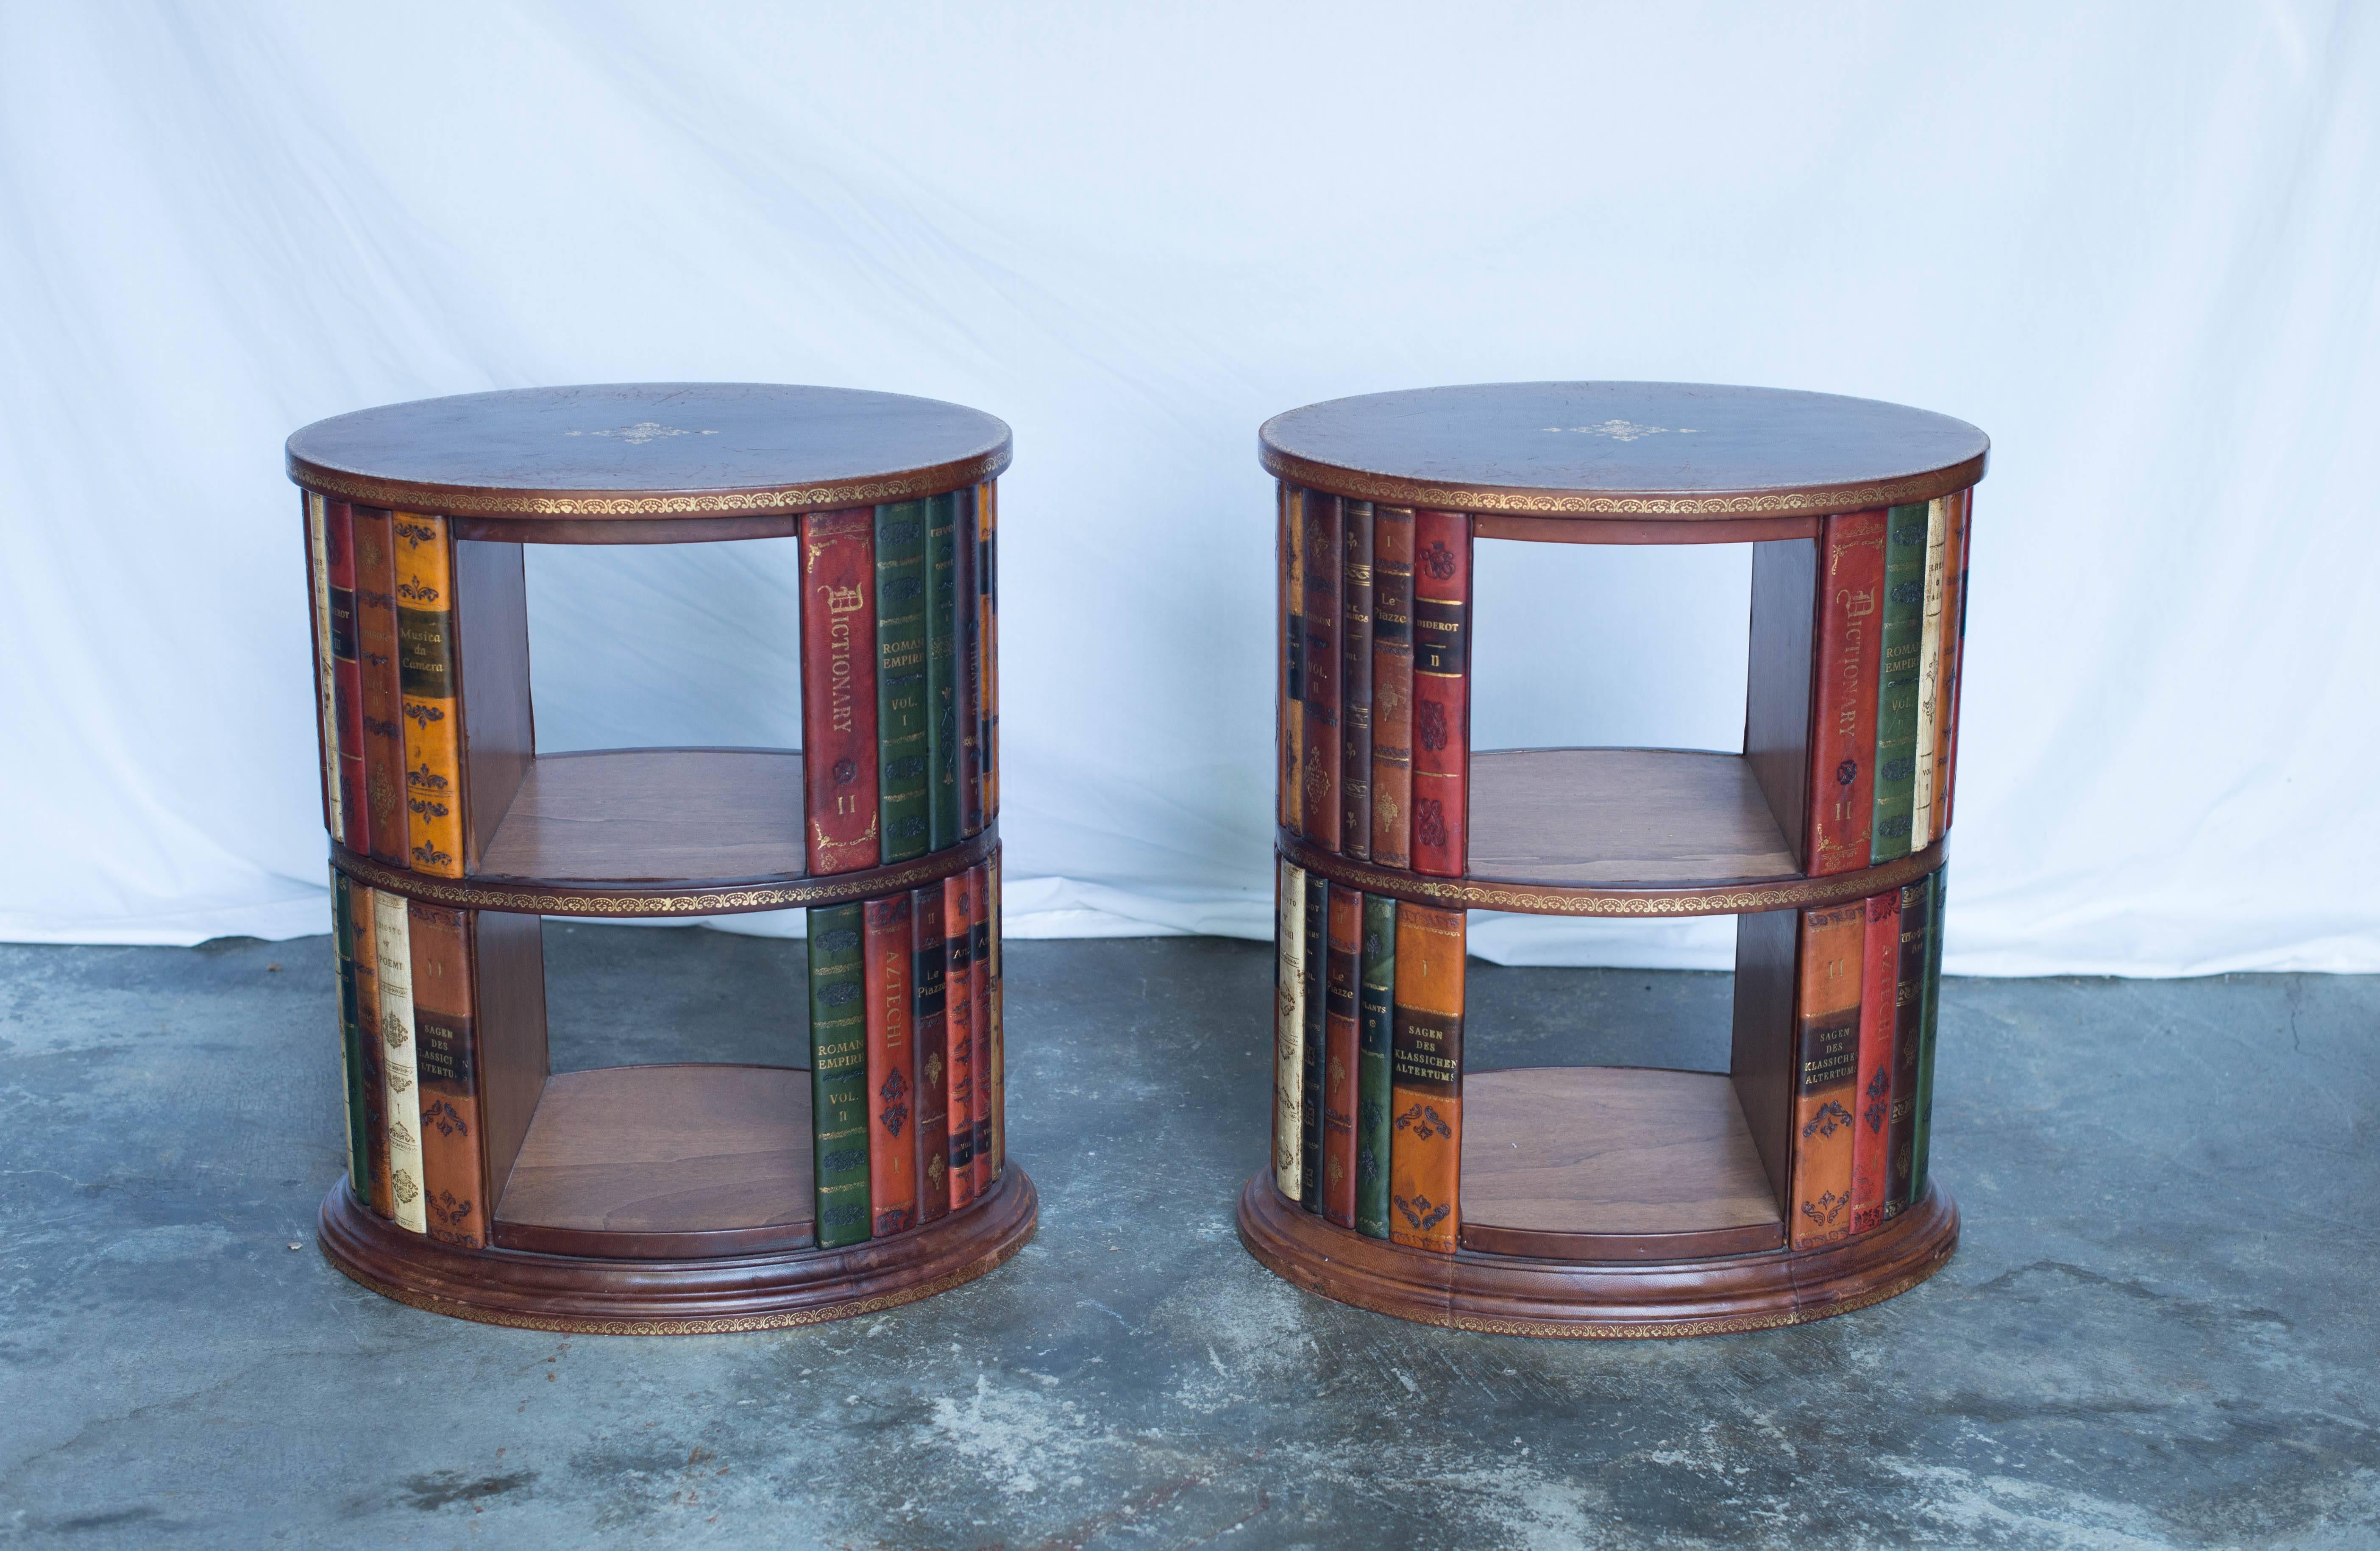 This pair of Italian hand tooled leather side tables features a leather bound book motif. The leather is a lovely brown with gold accents. The shelves are made from wood.